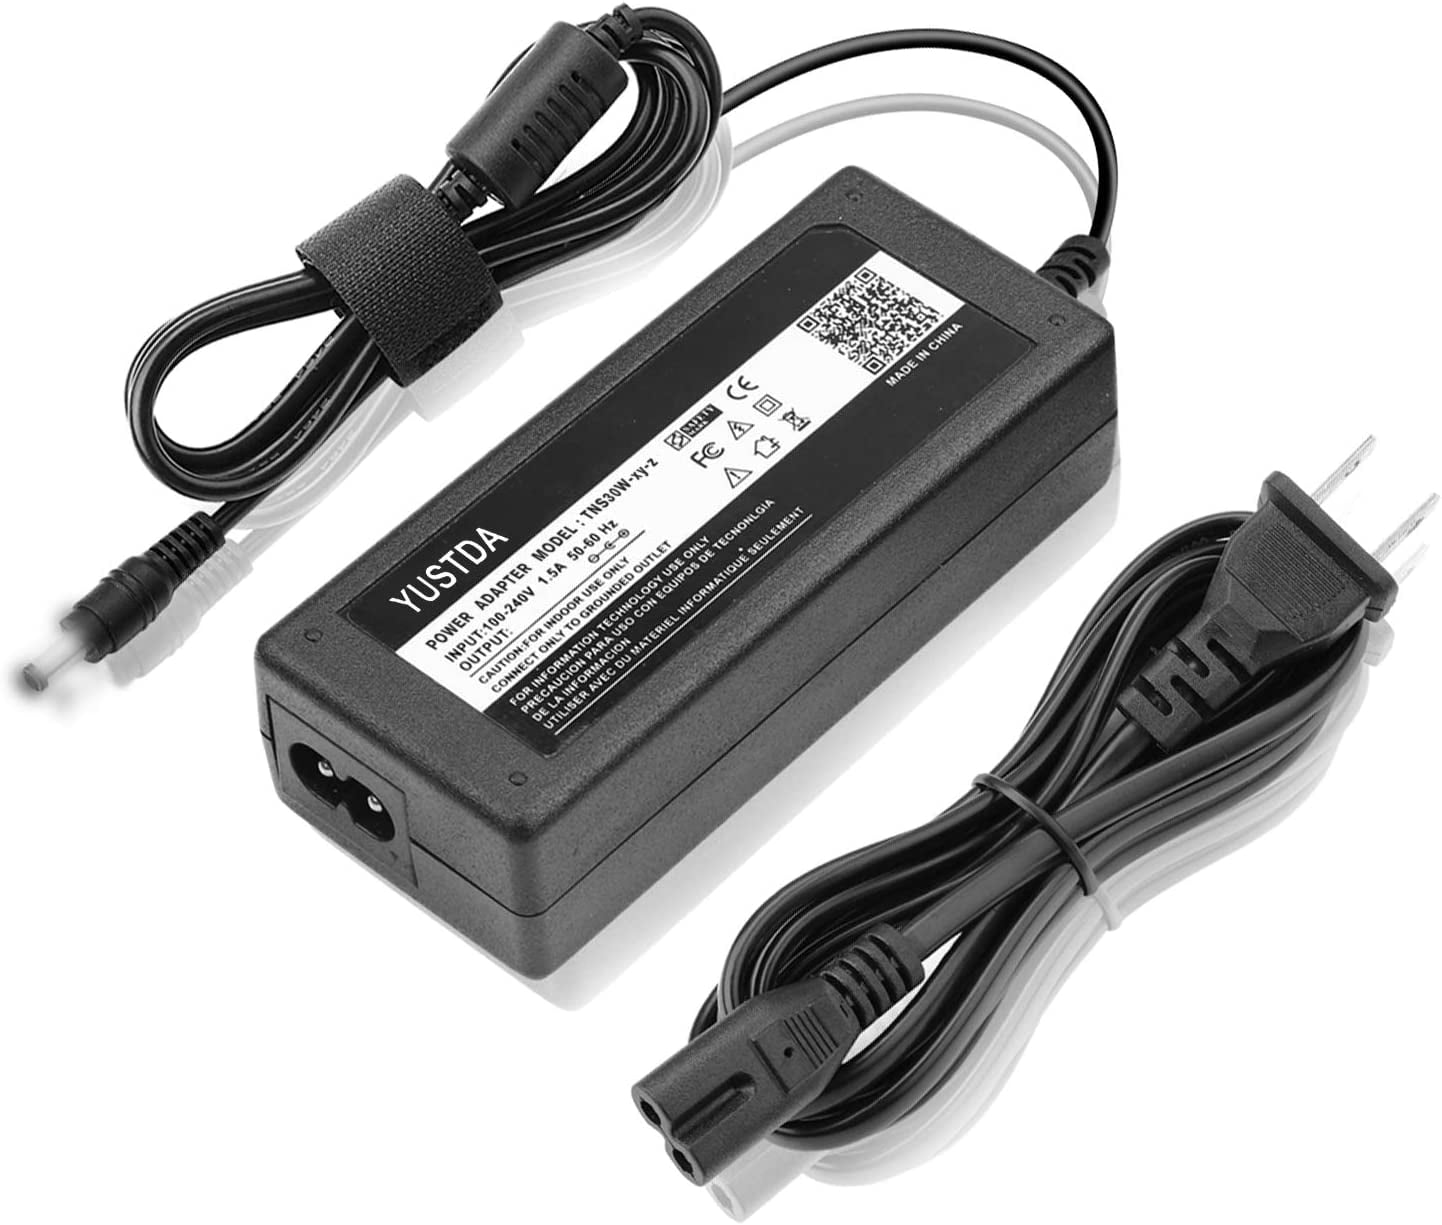 Yustda New 12V AC/DC Adapter Replacement for LaserPecker 2 (Pro) L2  L2-KDR88 3 Basic LS-3 CC Super Fast Engraver Cutter Machine 12VDC 12.0V 12  Volts Power Supply Cord Cable Battery Charger 